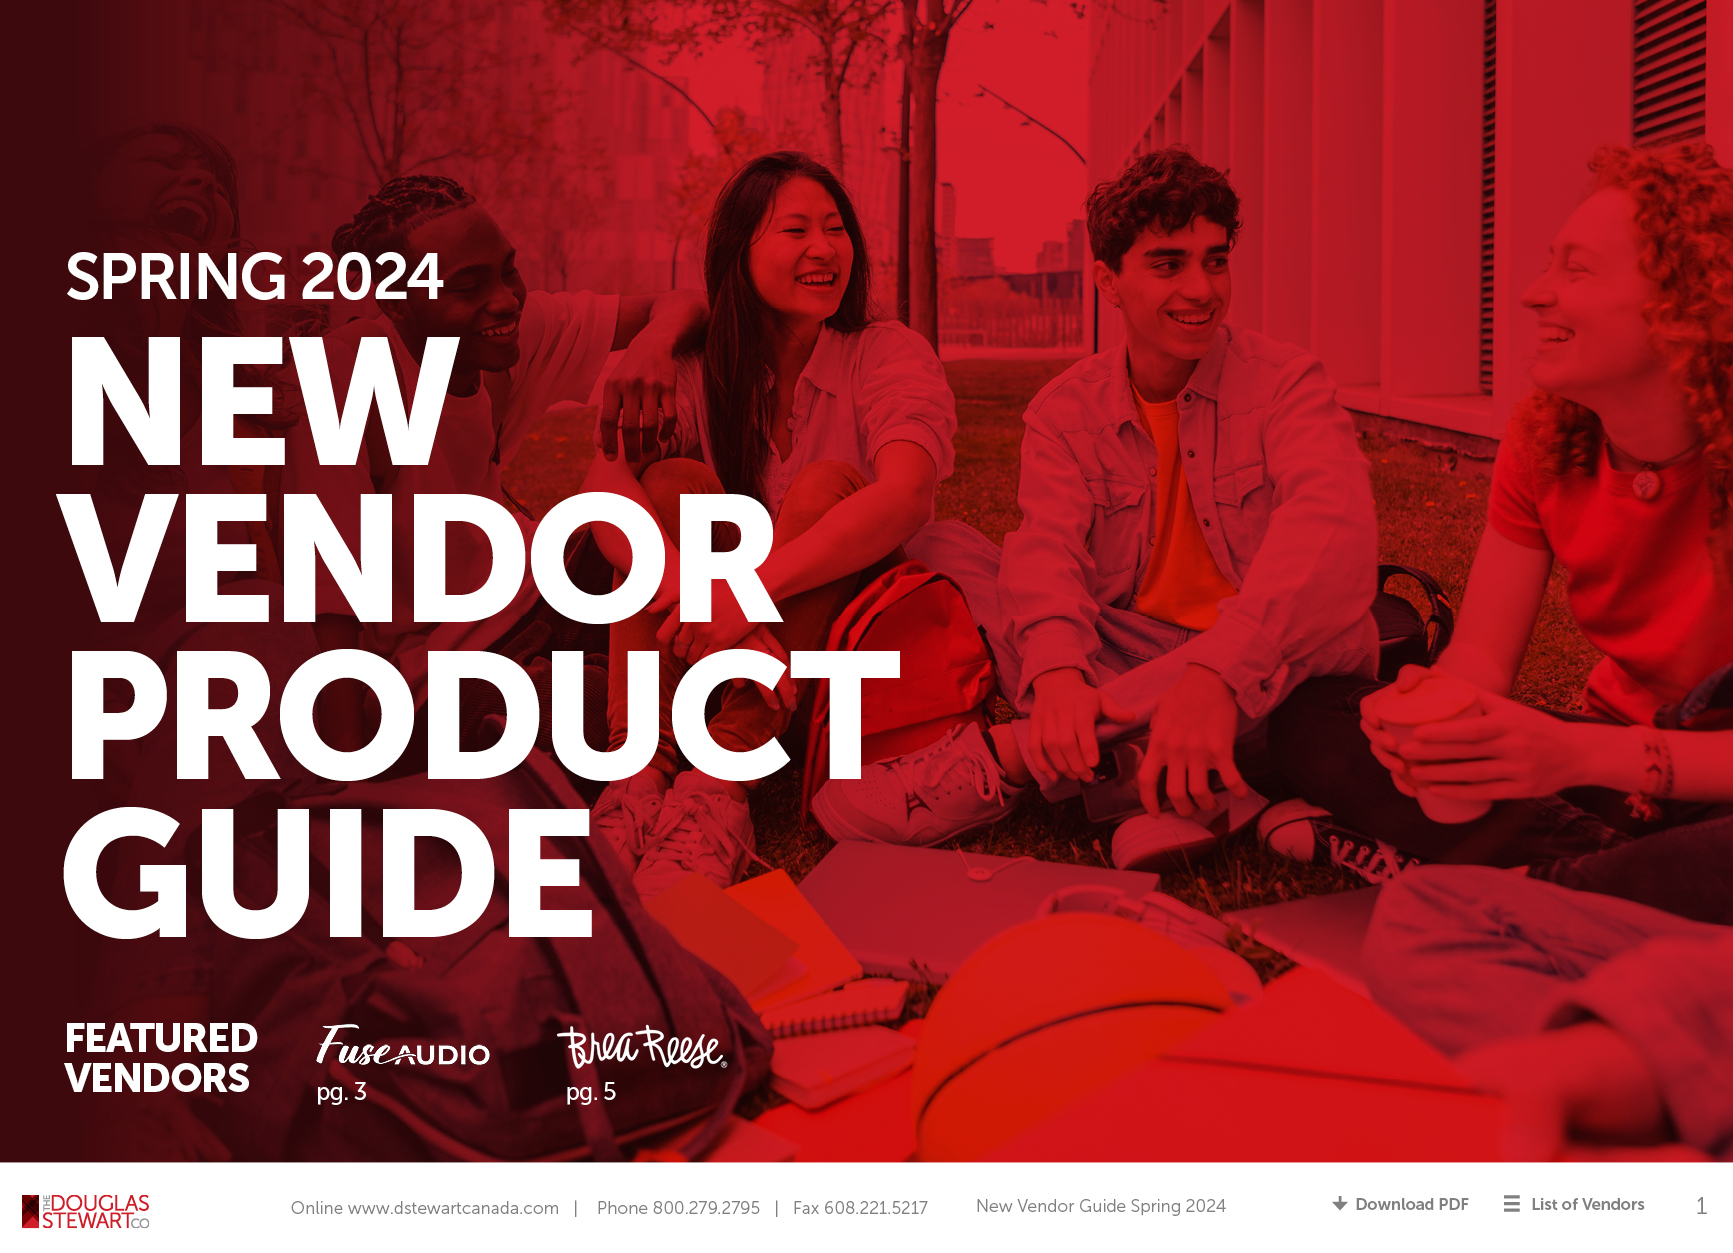 New Vendor Product Guide Spring 2024